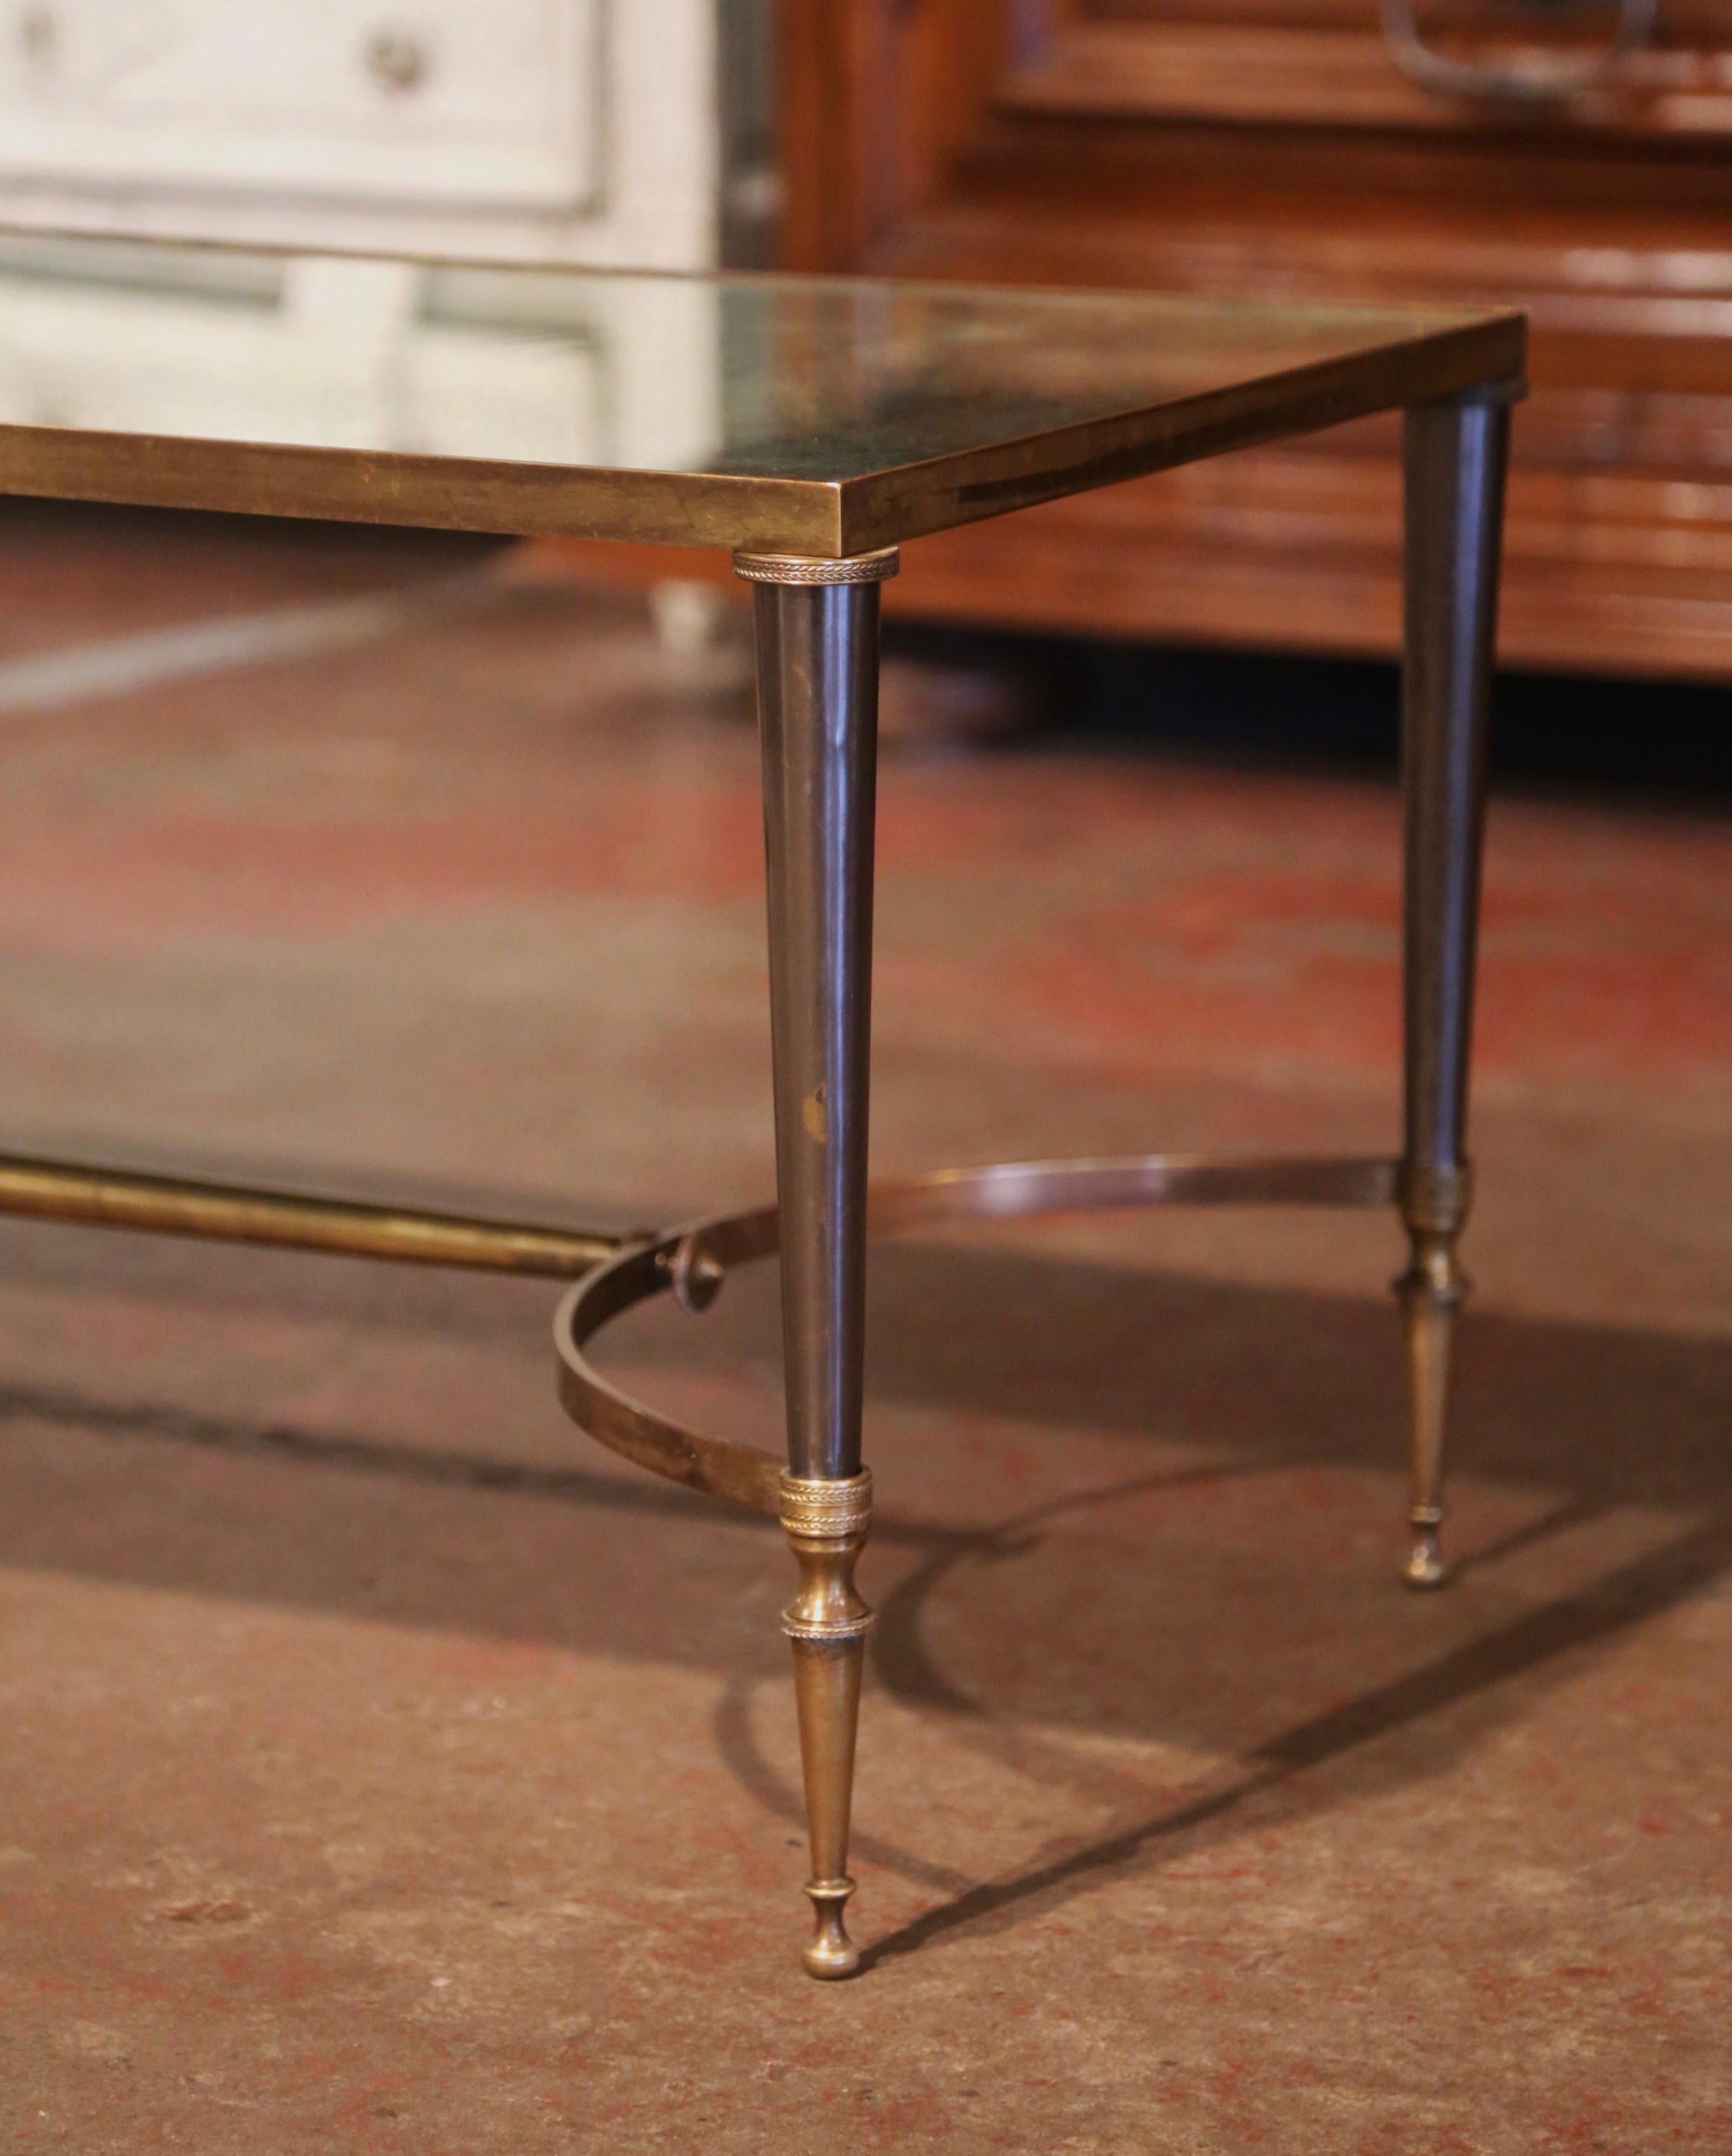 This elegant and slender cocktail table was crafted in France by Maison Baguès circa 1960; the table stands on four cast bronze tapered legs embellished with ring decor, over an arched bottom stretcher dressed with end finials. The surface is